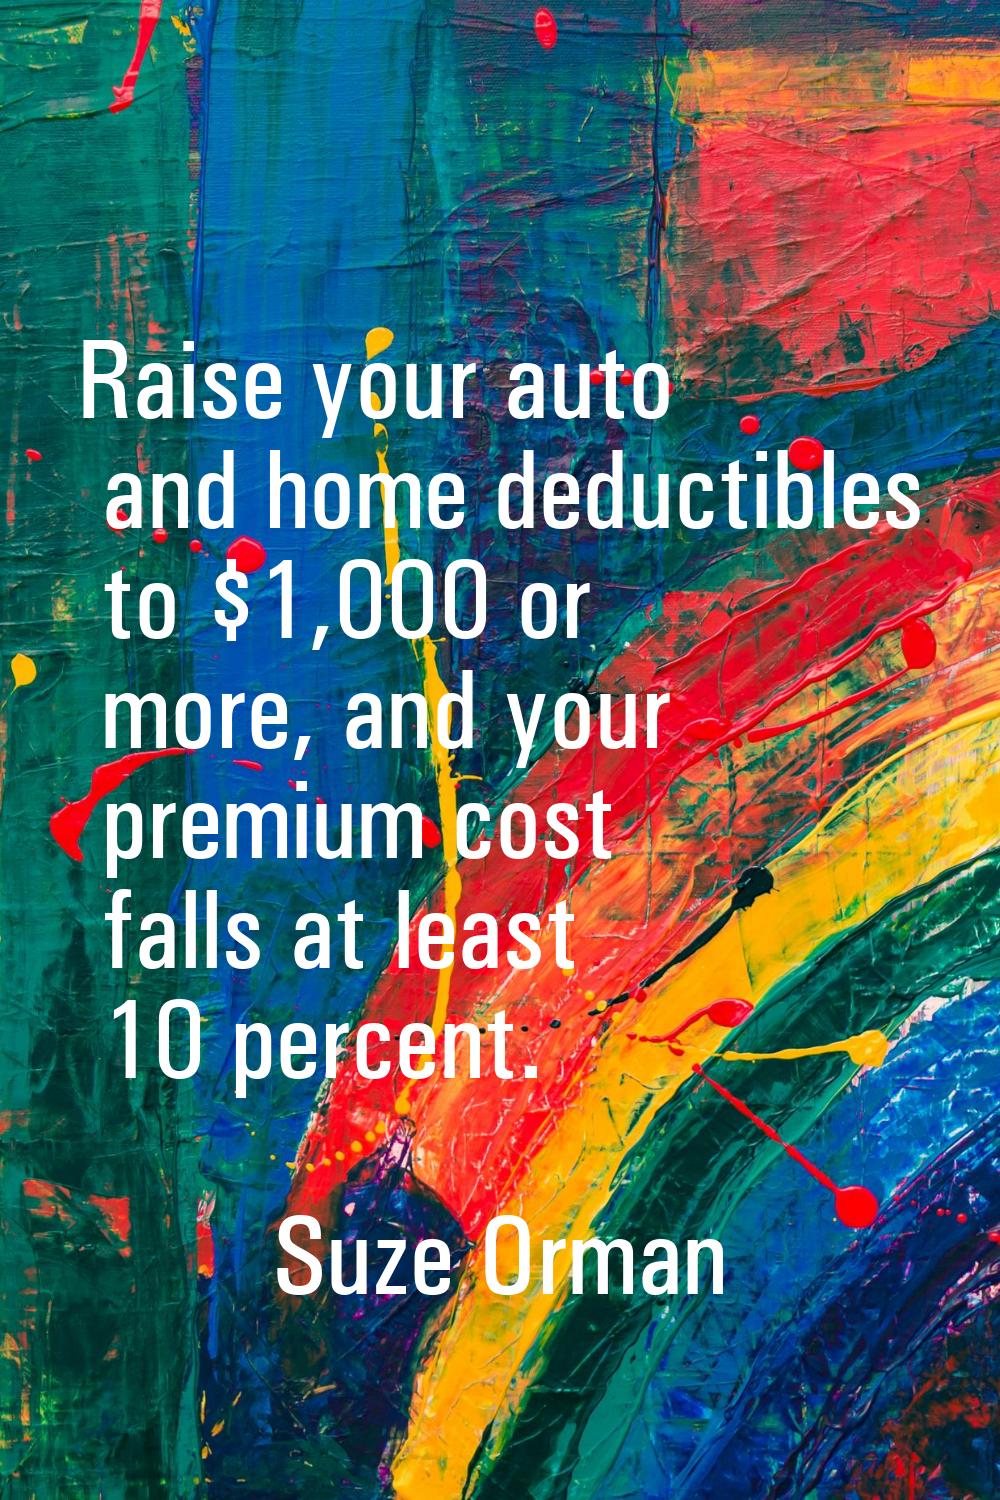 Raise your auto and home deductibles to $1,000 or more, and your premium cost falls at least 10 per